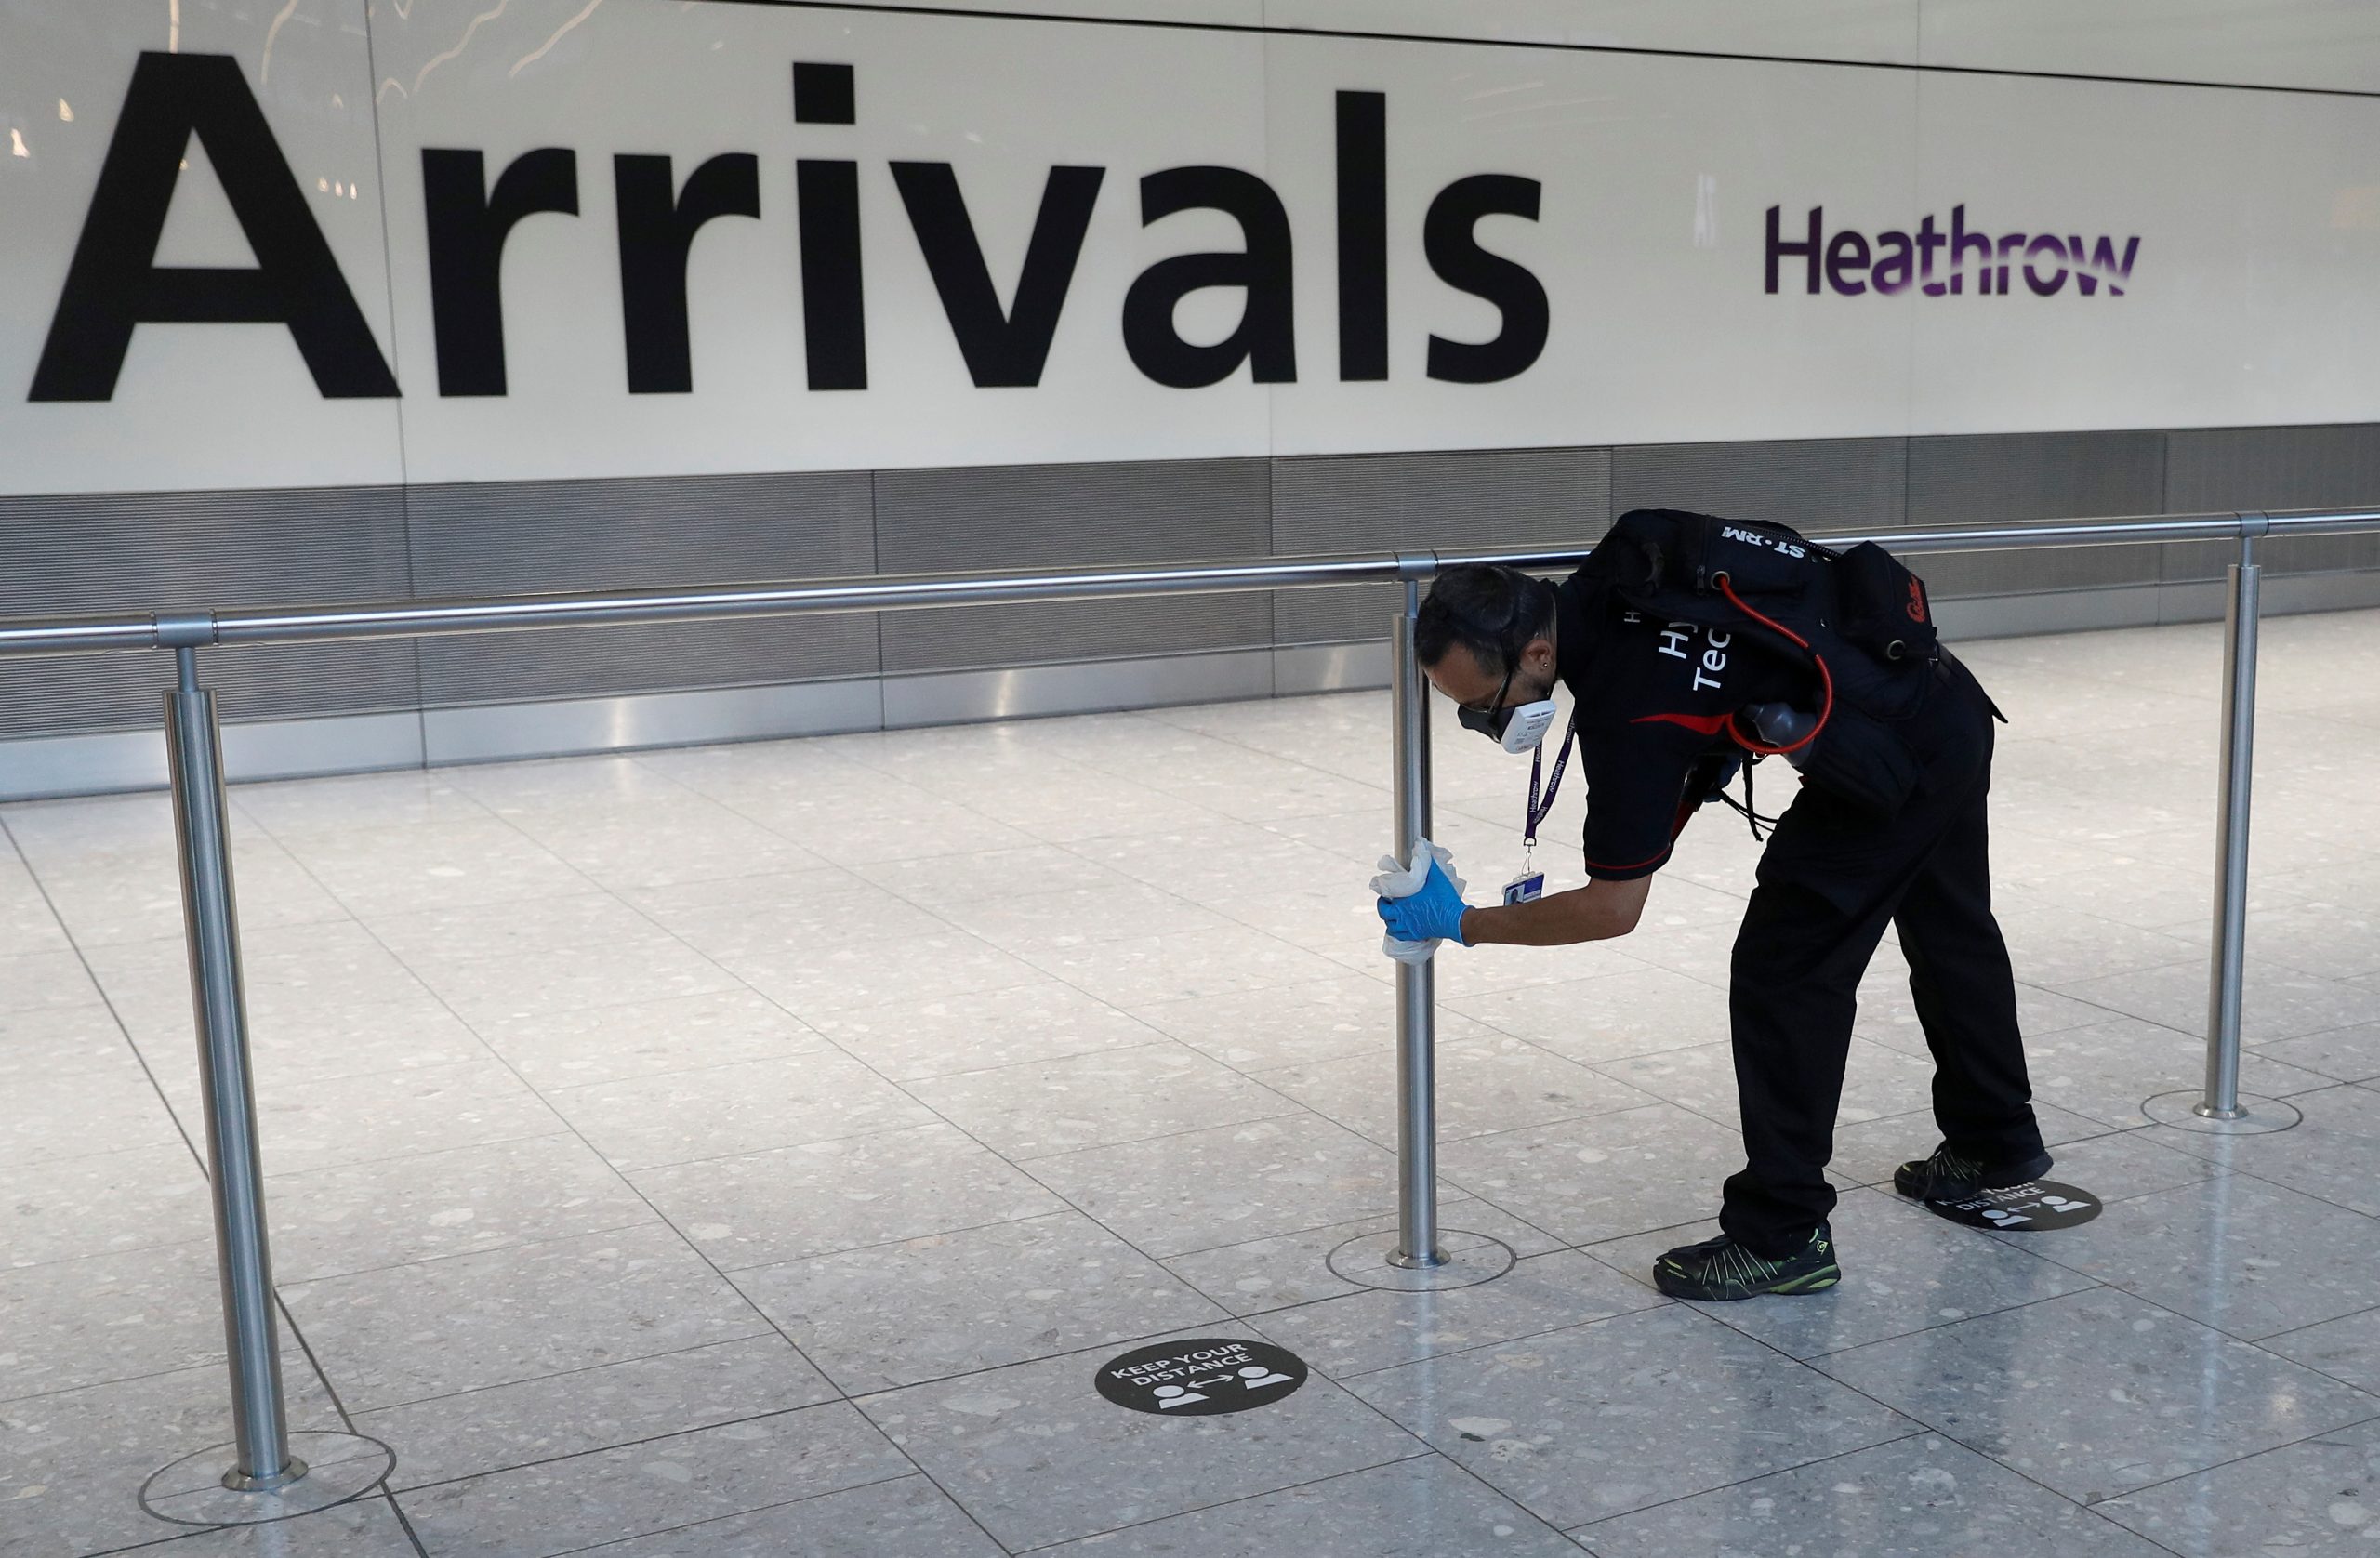 A worker sanitises a barrier at the International arrivals area of Terminal 5 in London's Heathrow Airport